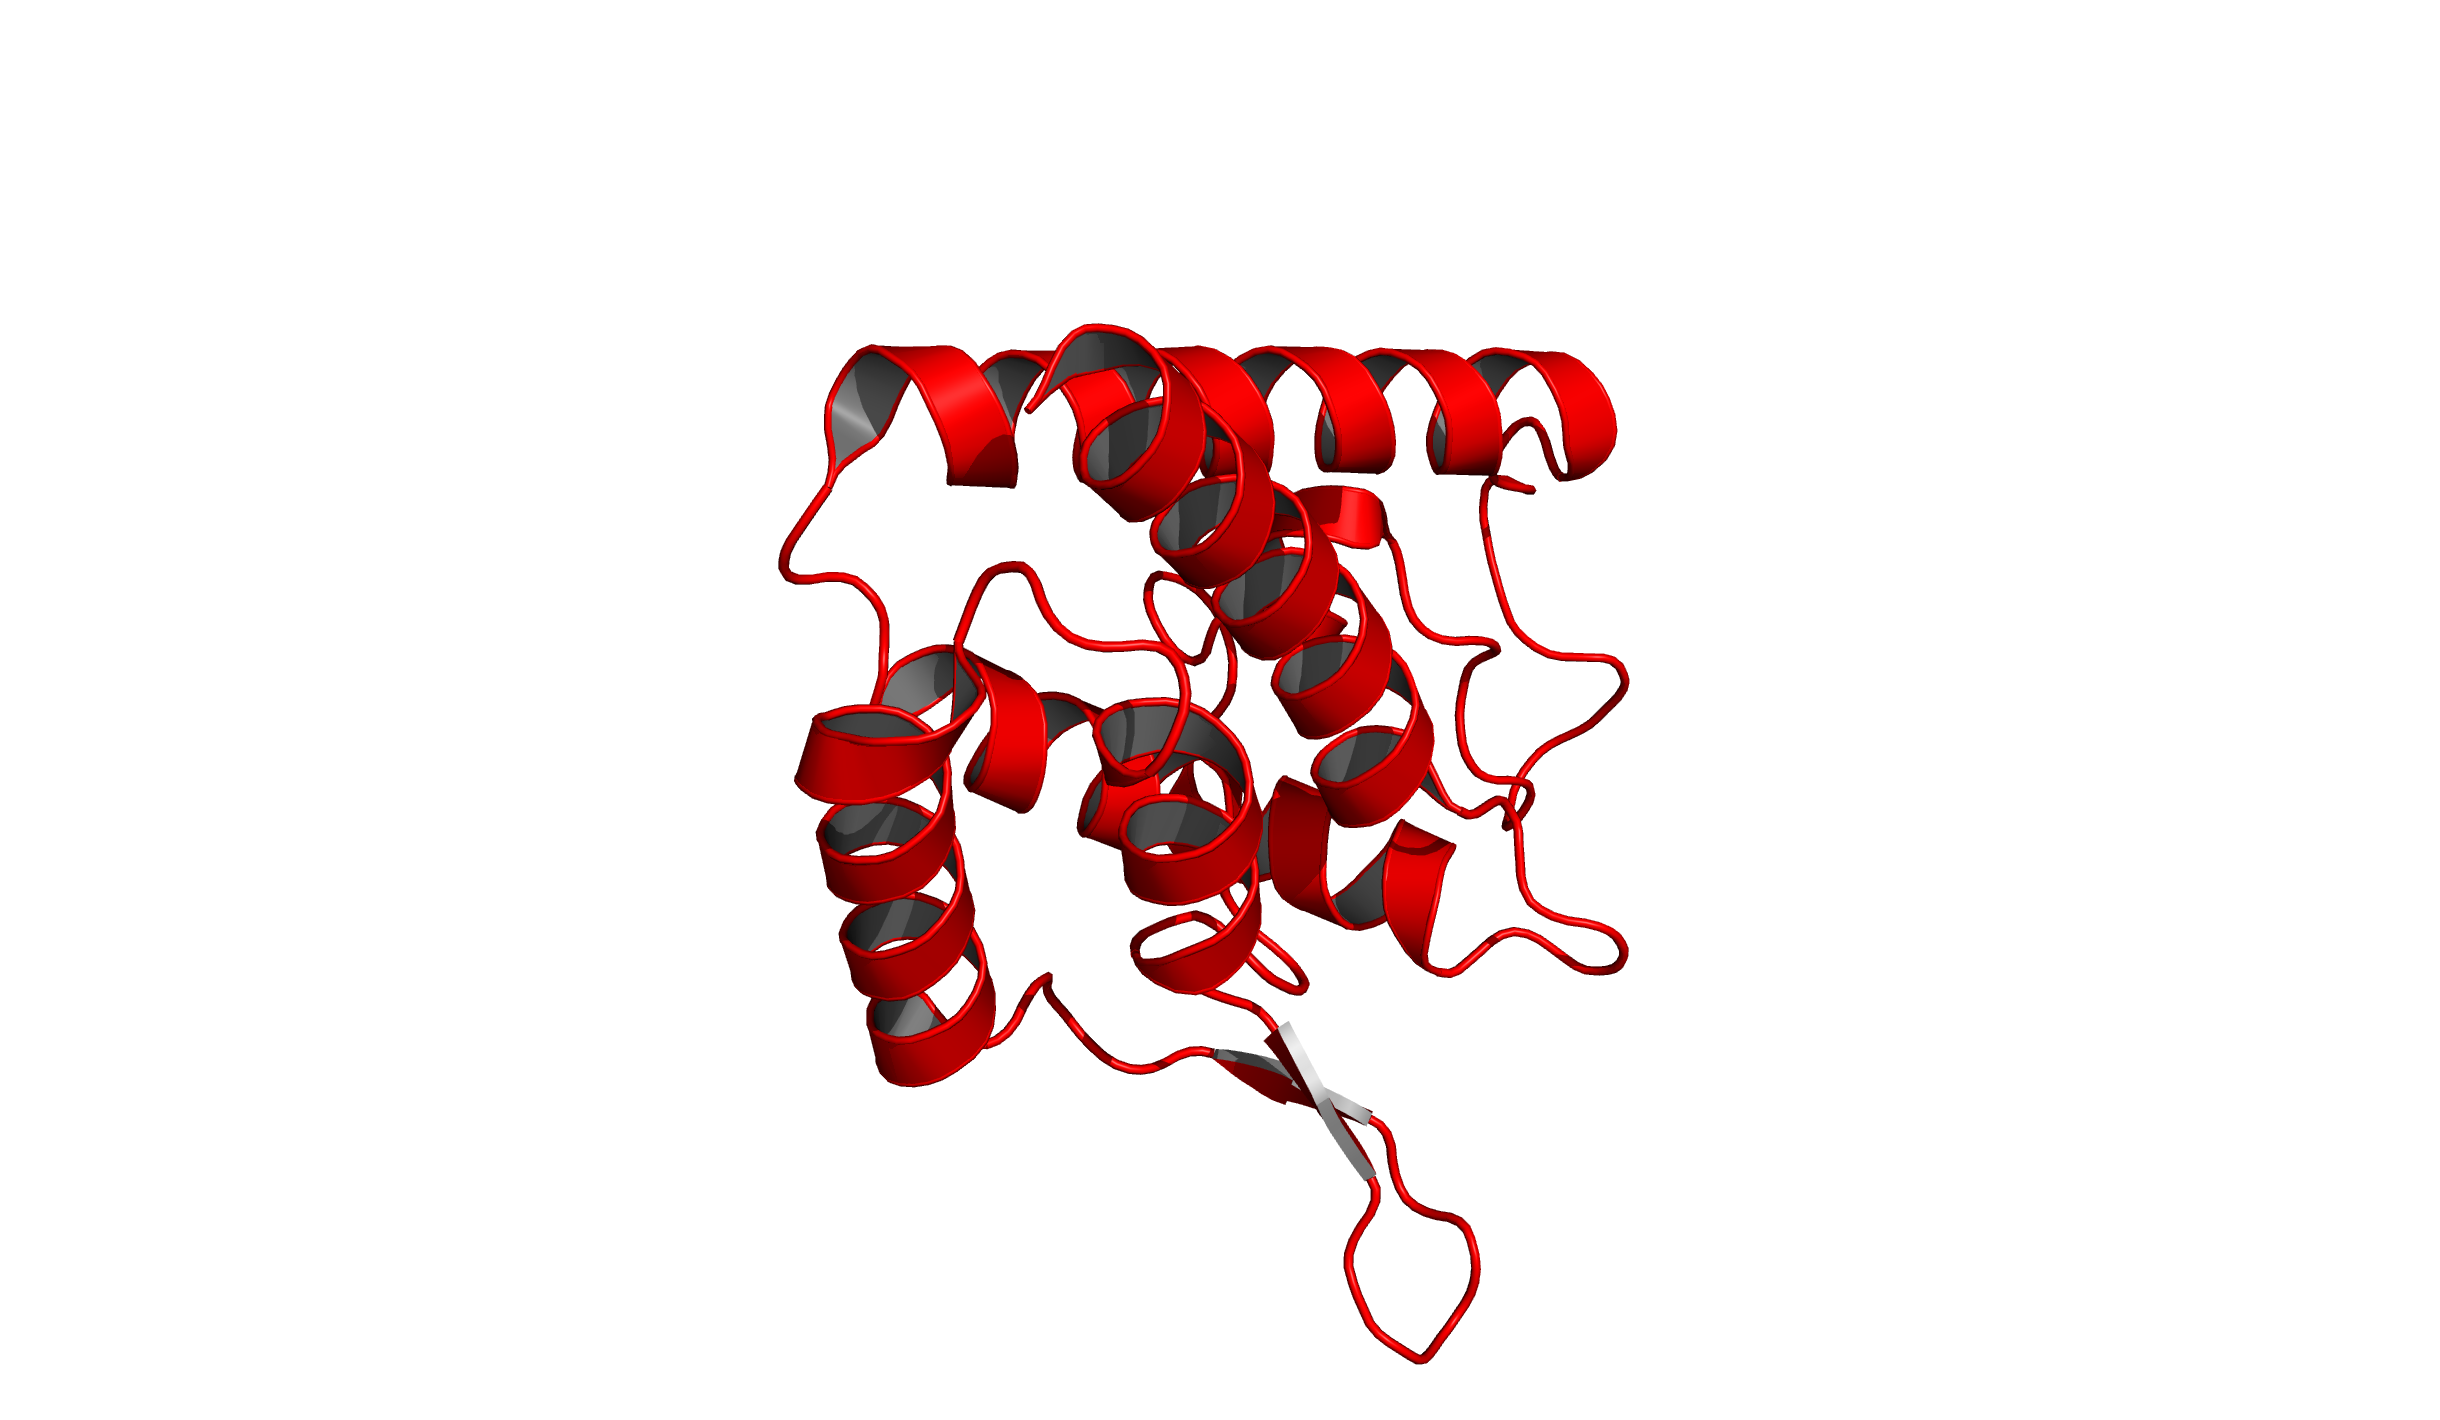 Default ray trace mode of a protein in PyMOL.